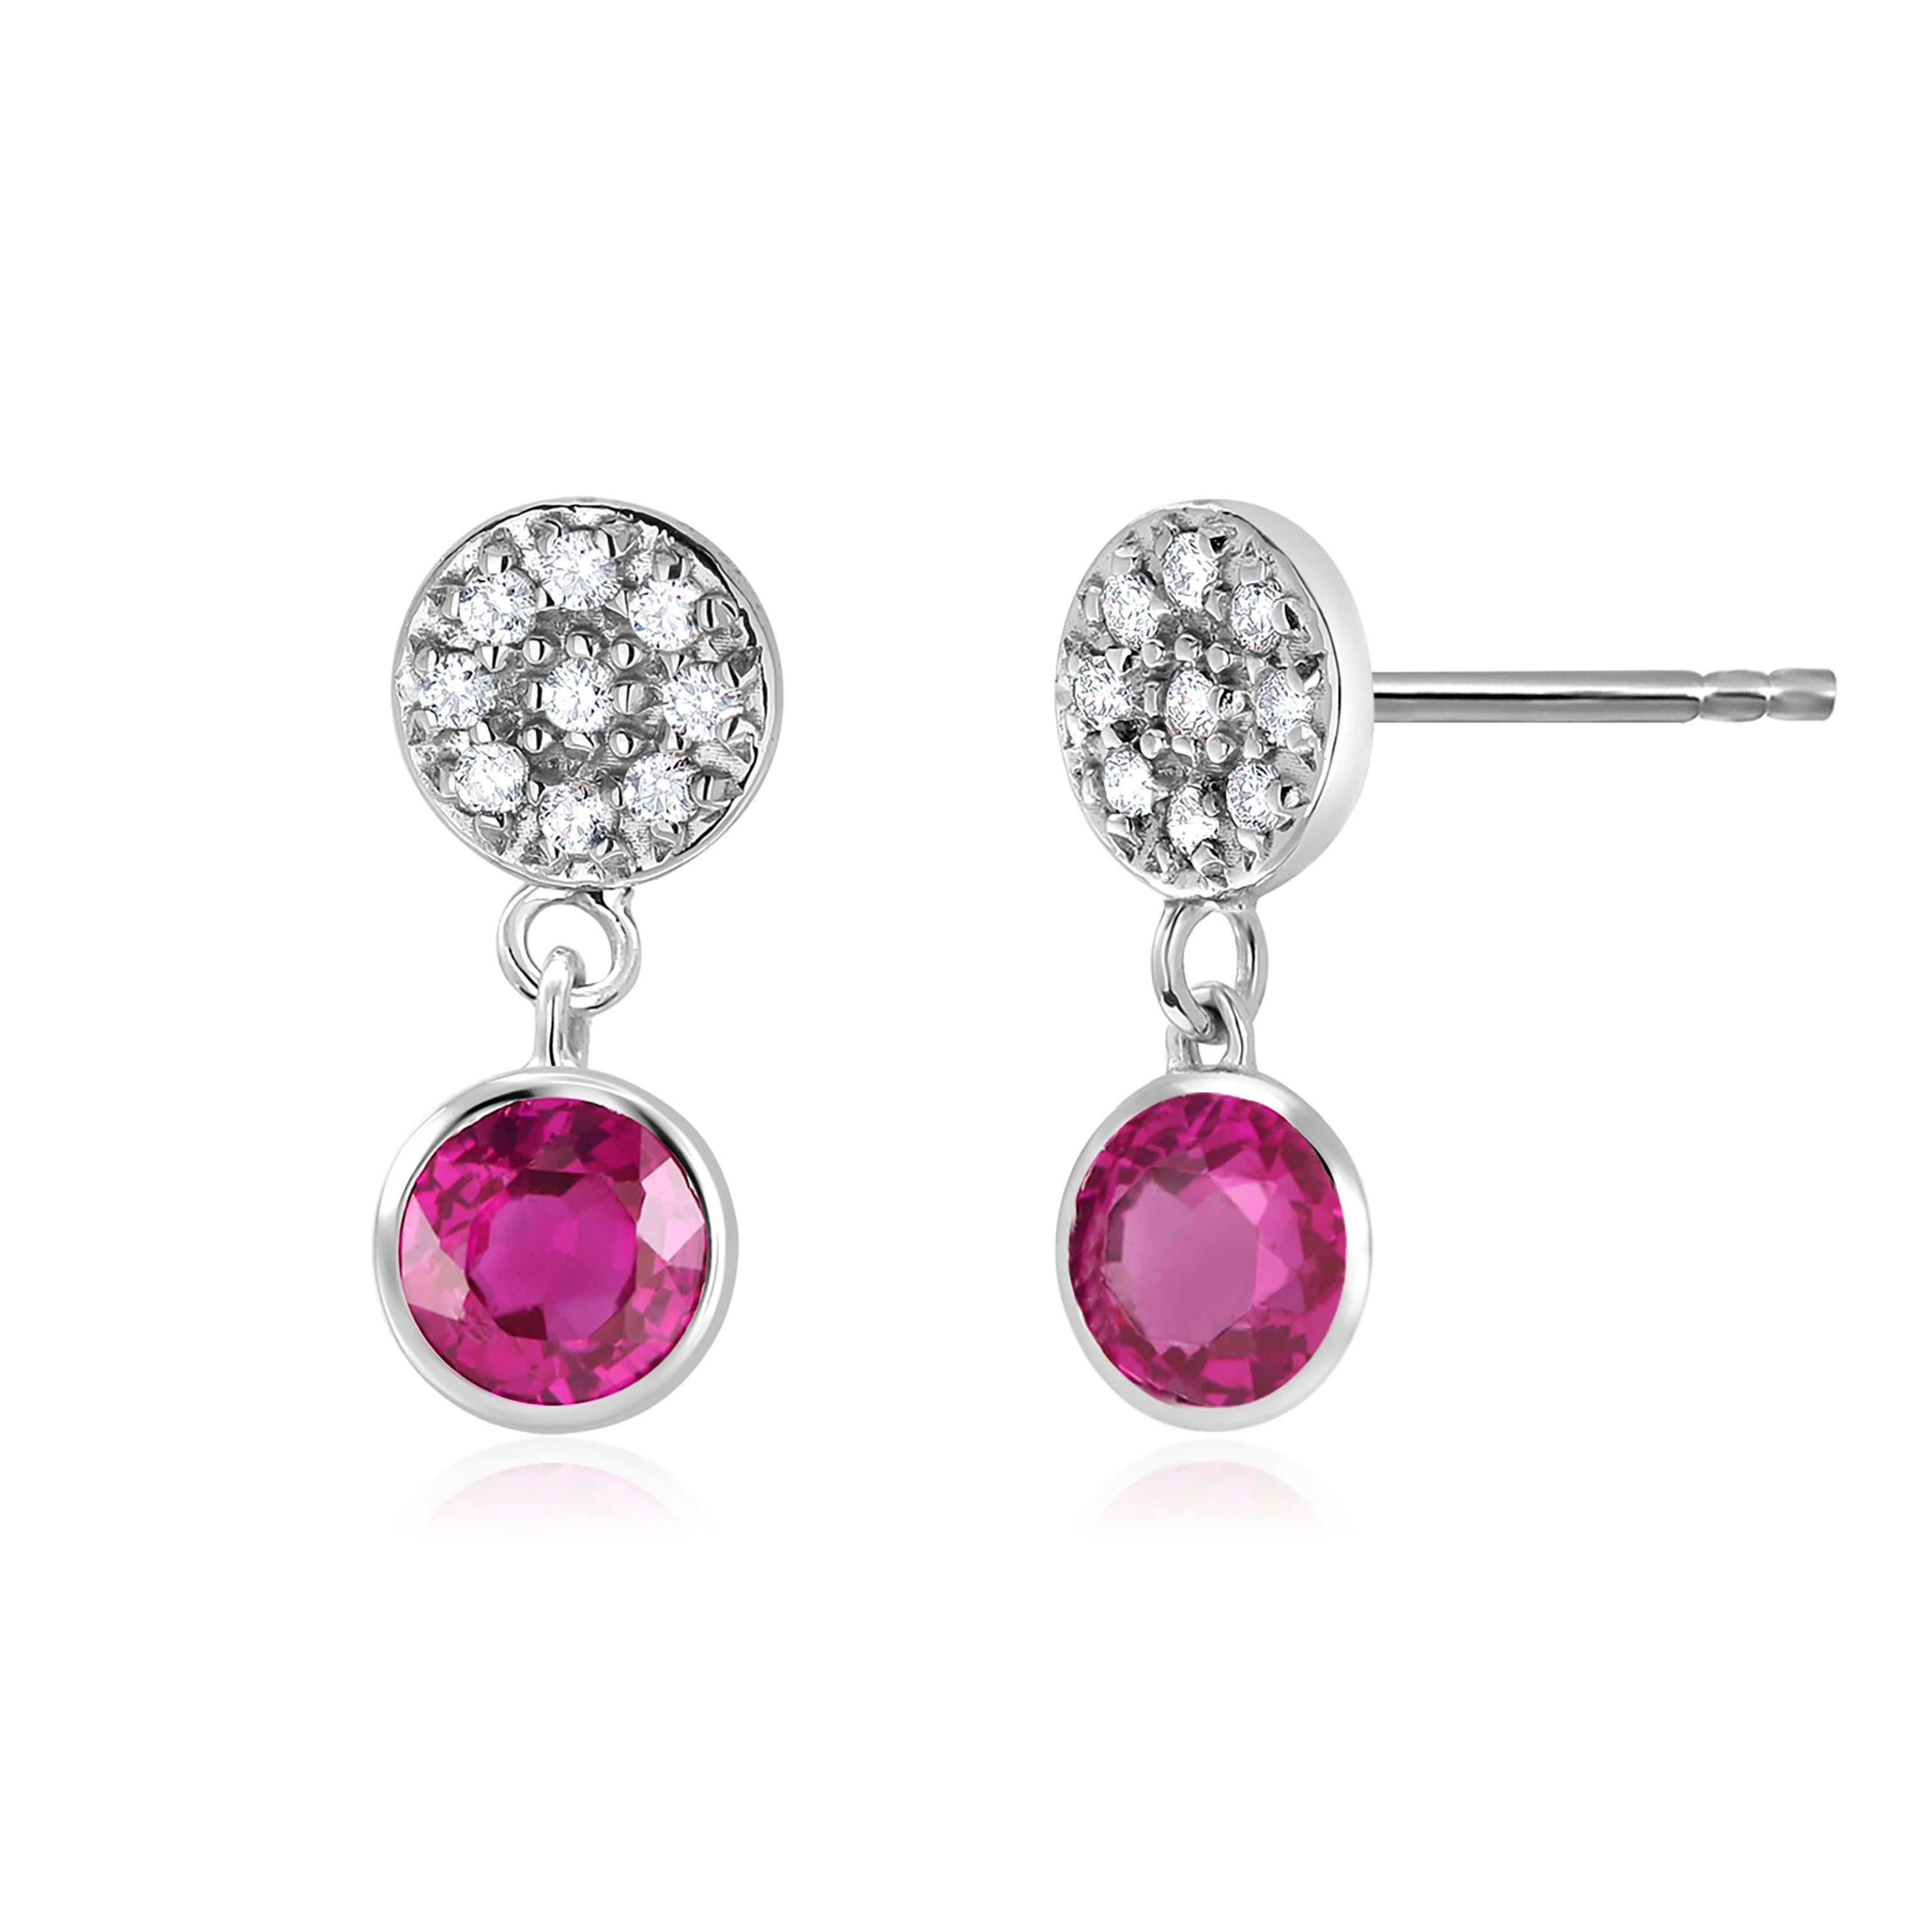 Round Cut Diamond Circle Studs with Two Round Ruby Bezel Set Drop Earrings